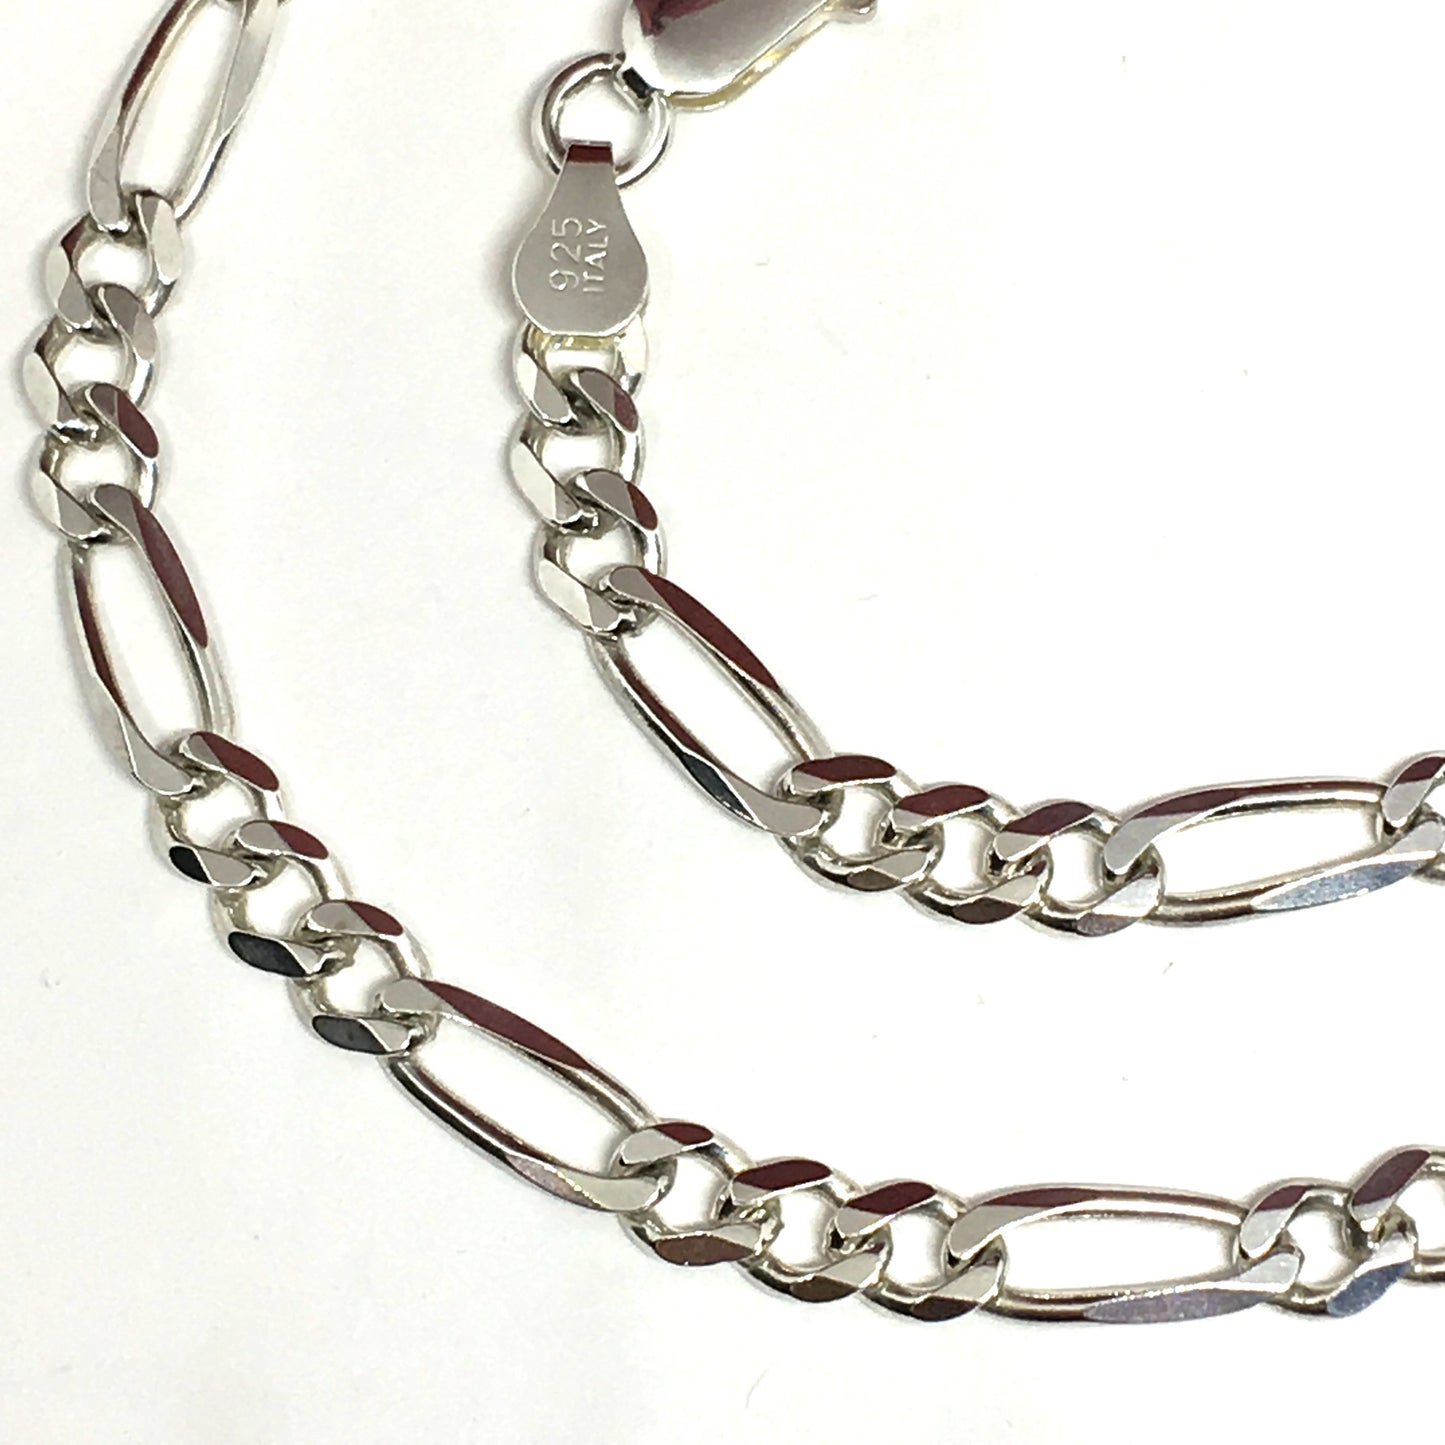 Silver Chain Necklace - 16" Sterling Silver 5mm Figaro Chain Necklace